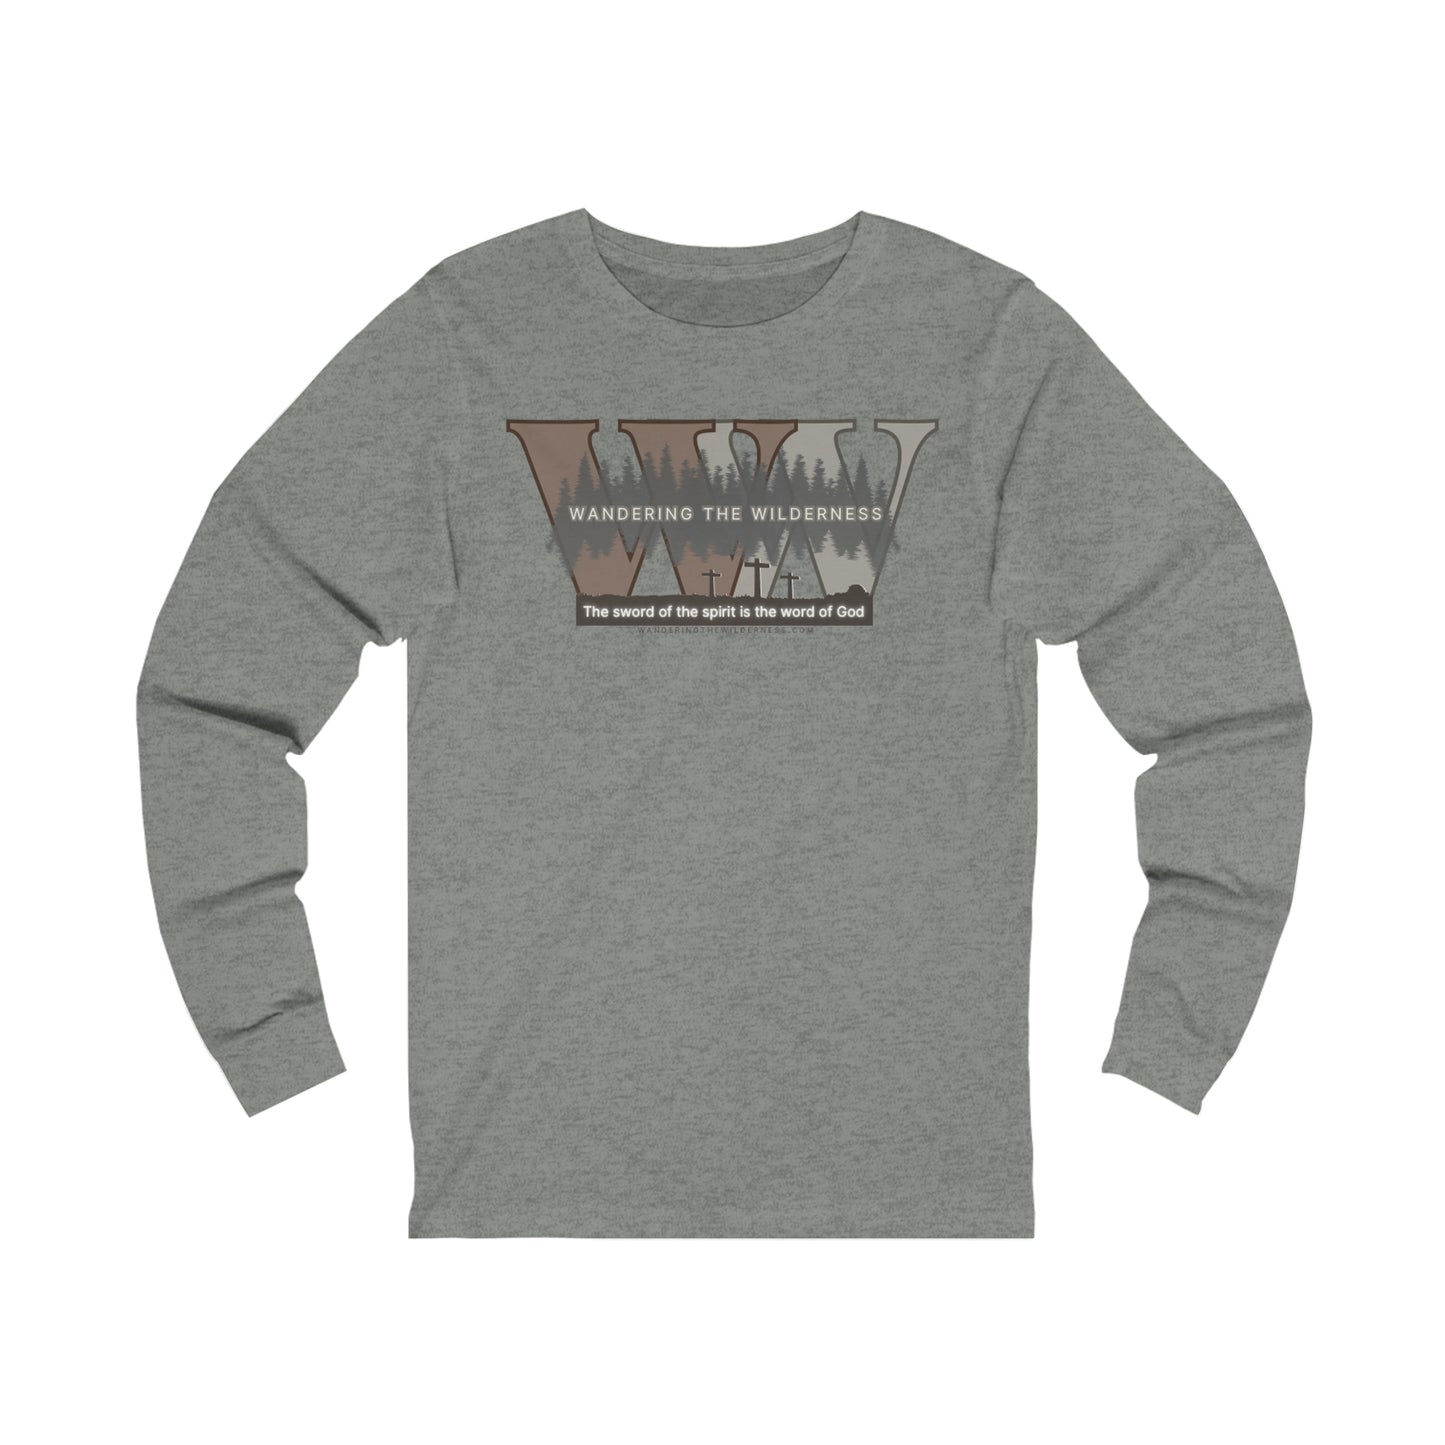 Wandering the Wilderness big logo on from long sleeve t-shirt.